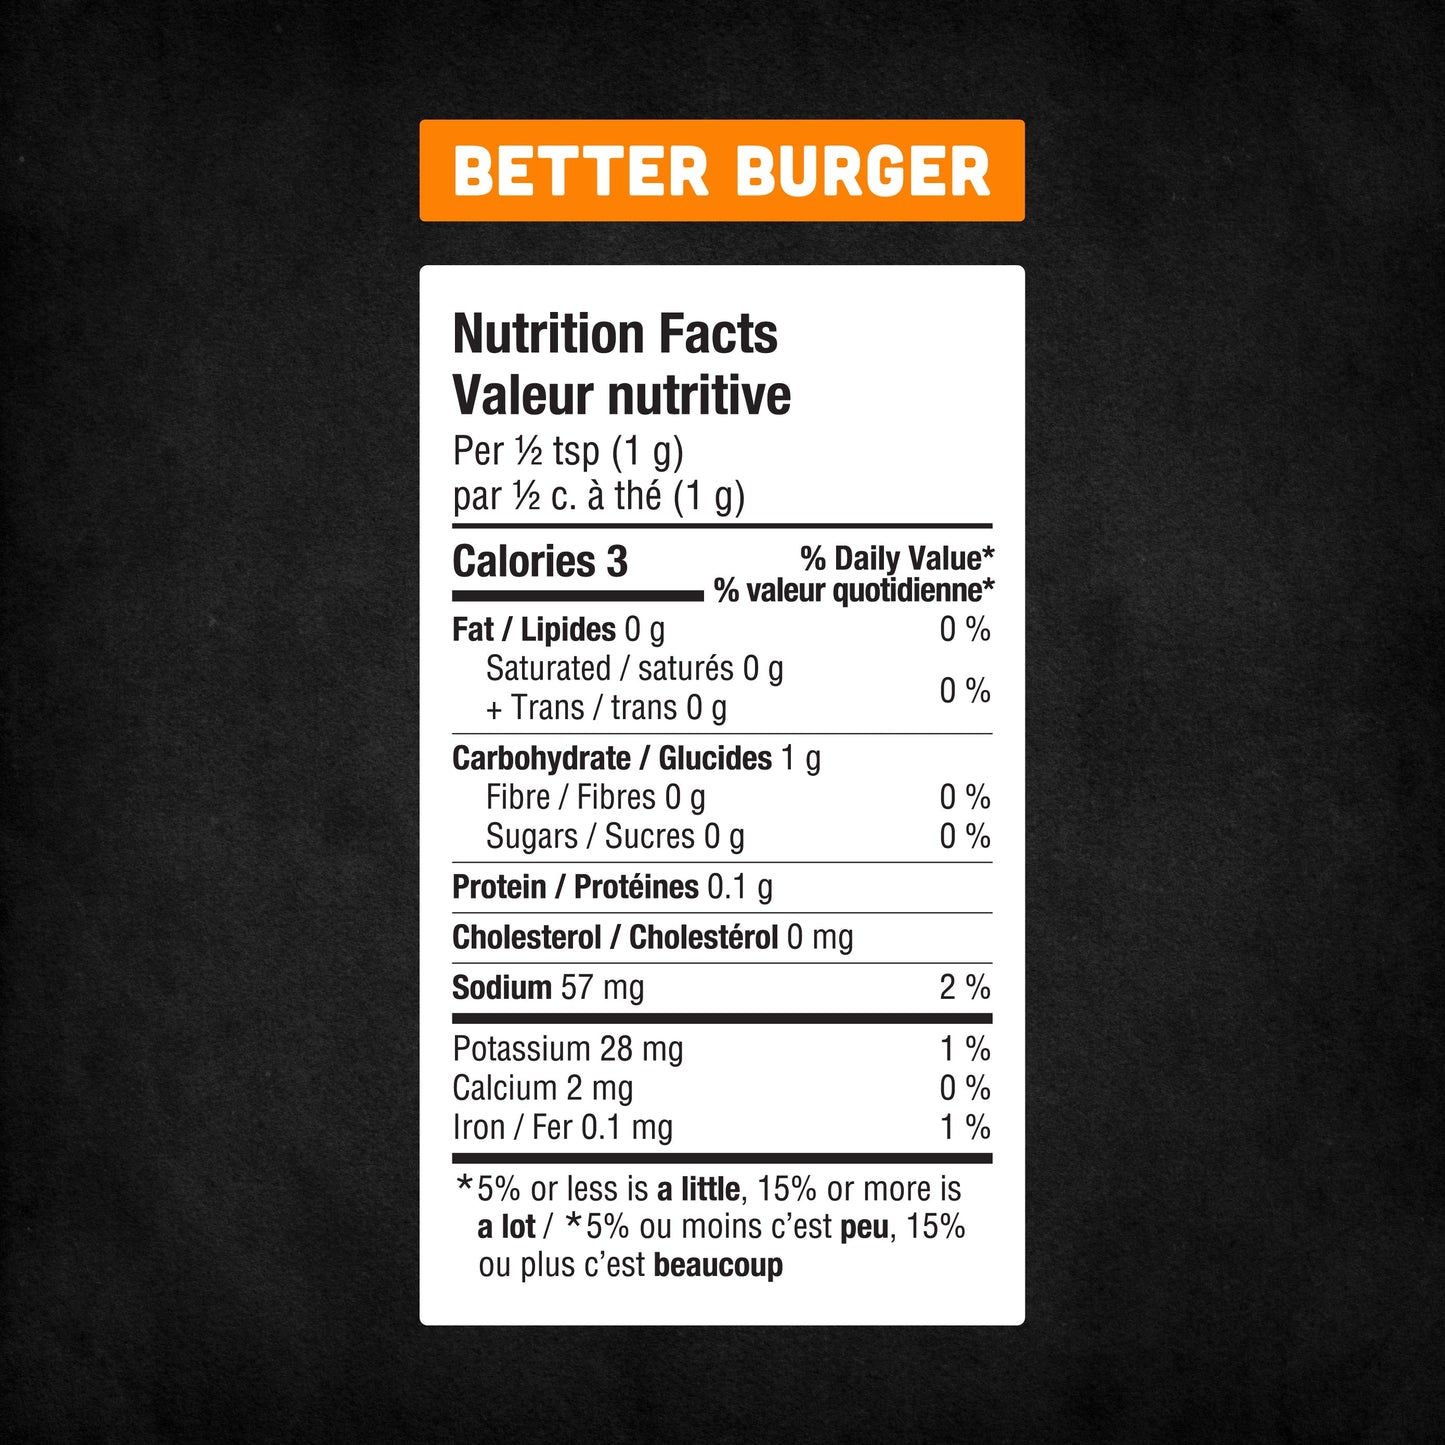 Better Burger nutrition fact table